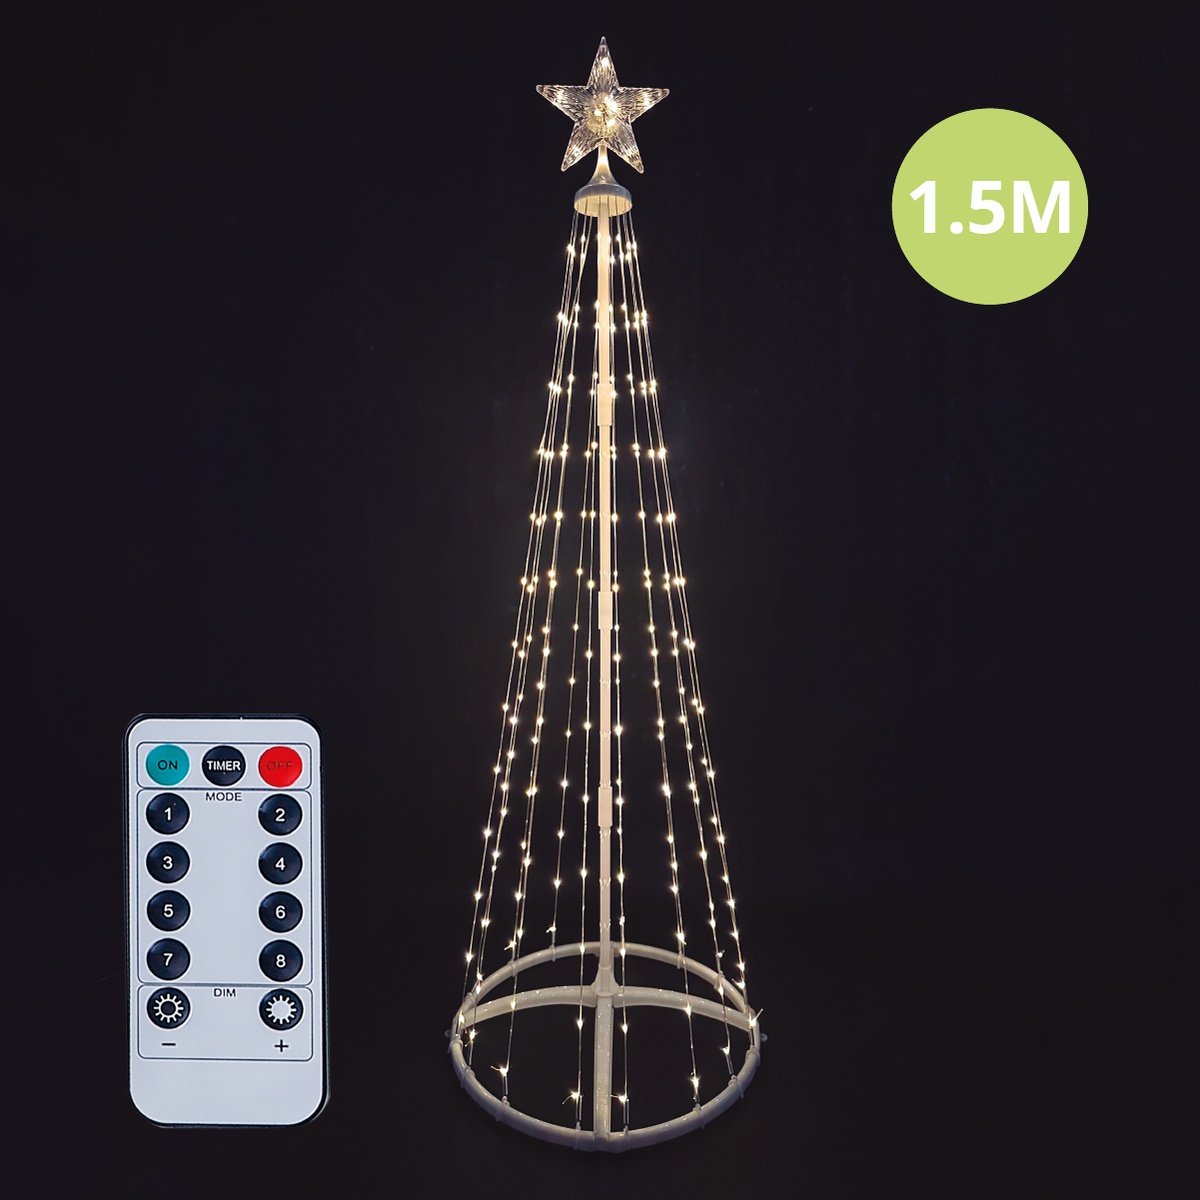 1,5M USB LED Tree with remote 8 functions Warm White IP44